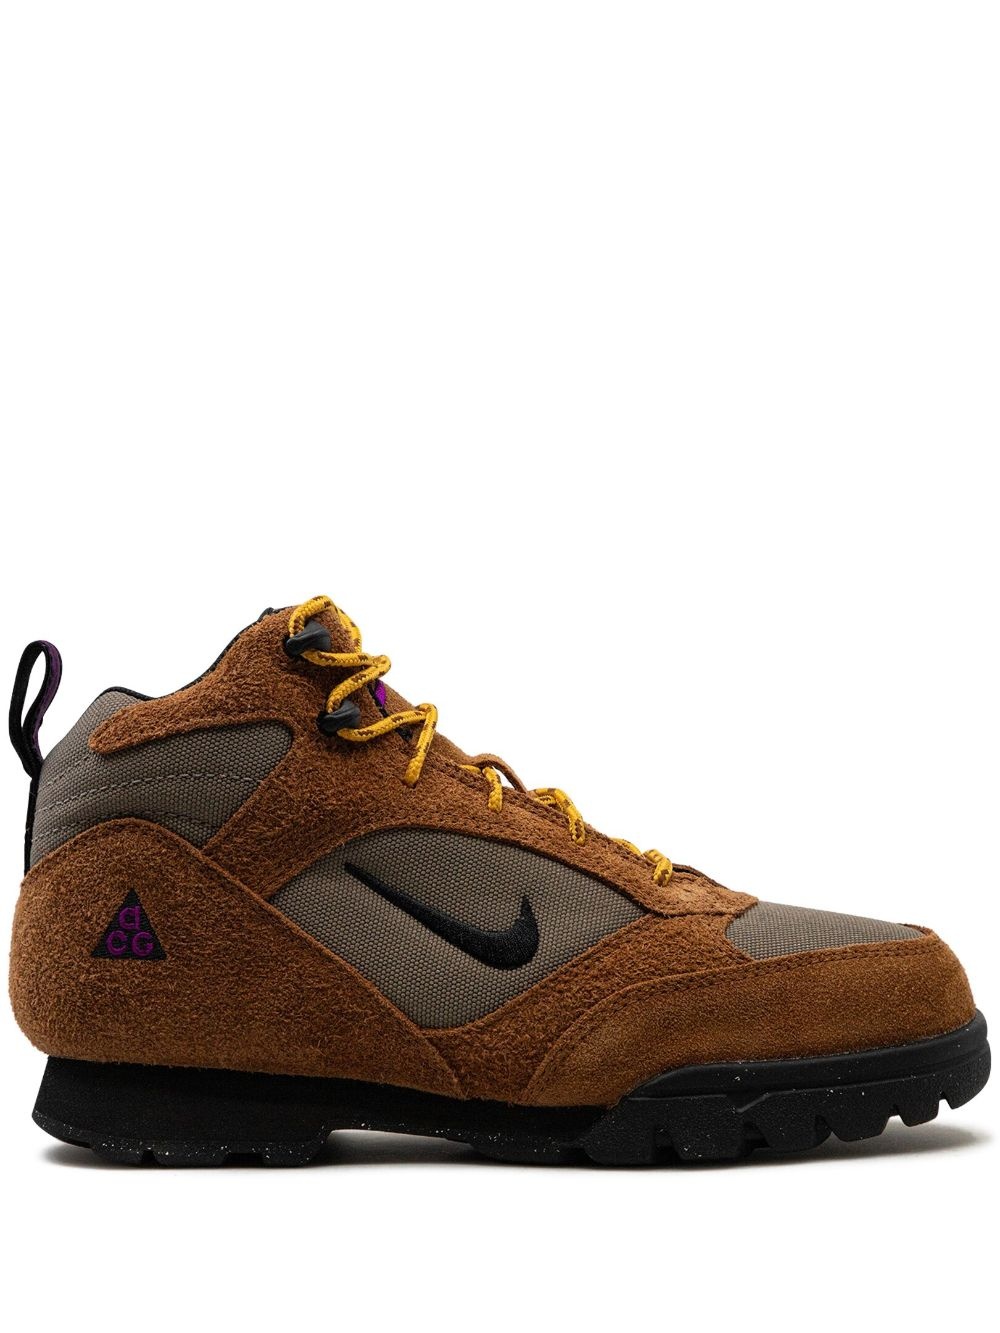 ACG Torre panelled boots - 1